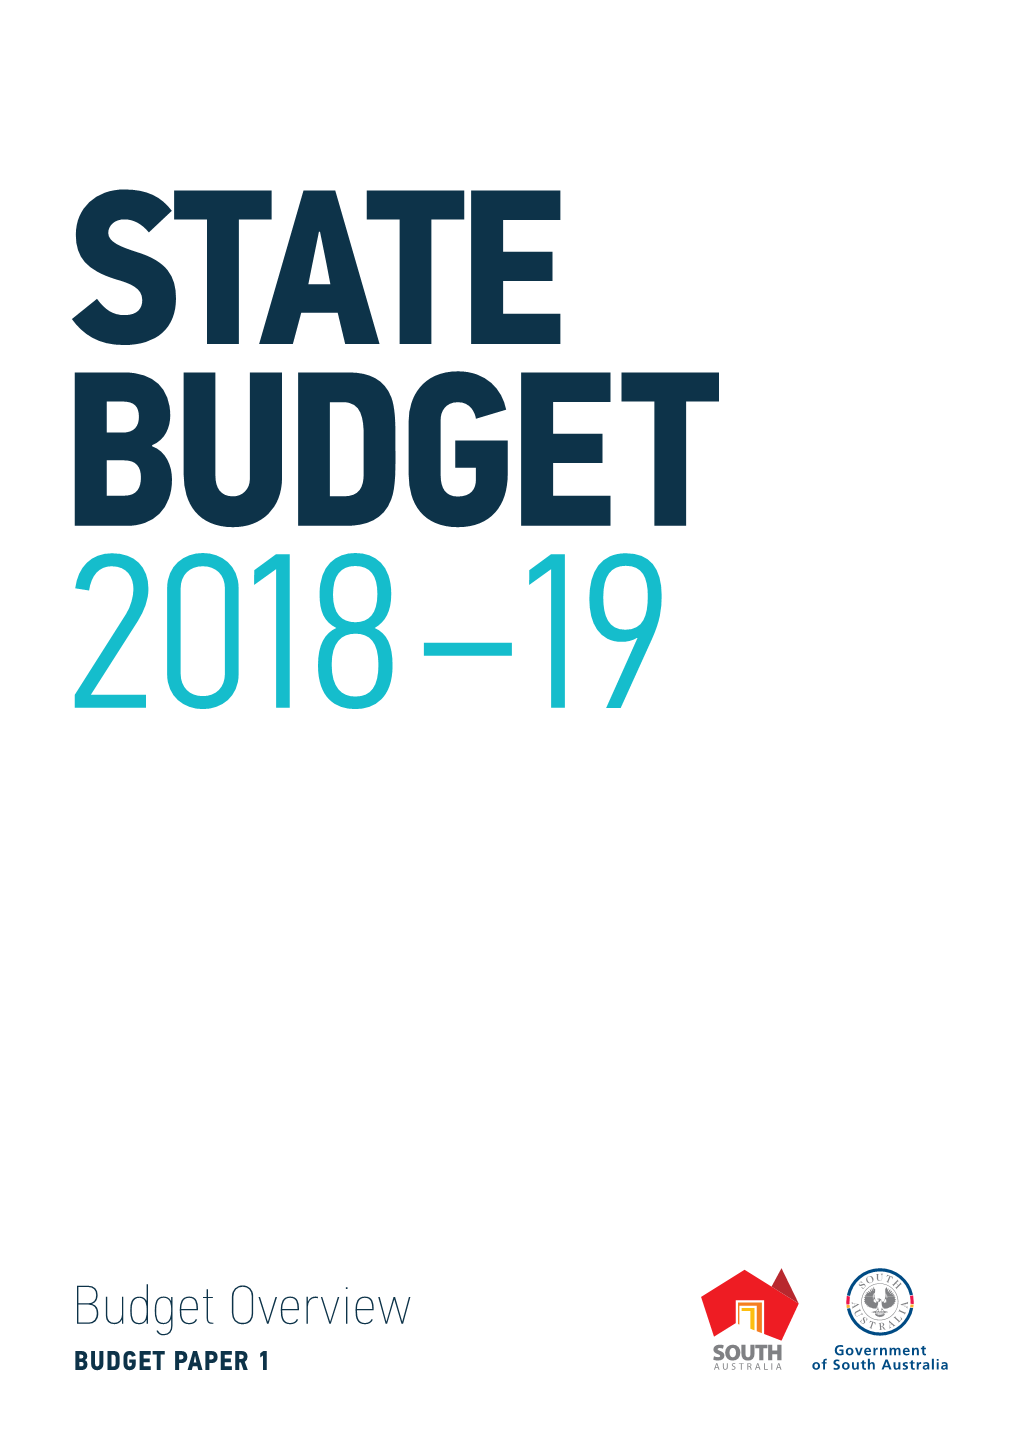 Budget Overview BUDGET PAPER 1 BUDGET PAPER 1: BUDGET OVERVIEW a Summary Publication Capturing All Highlights from the 2018–19 Budget